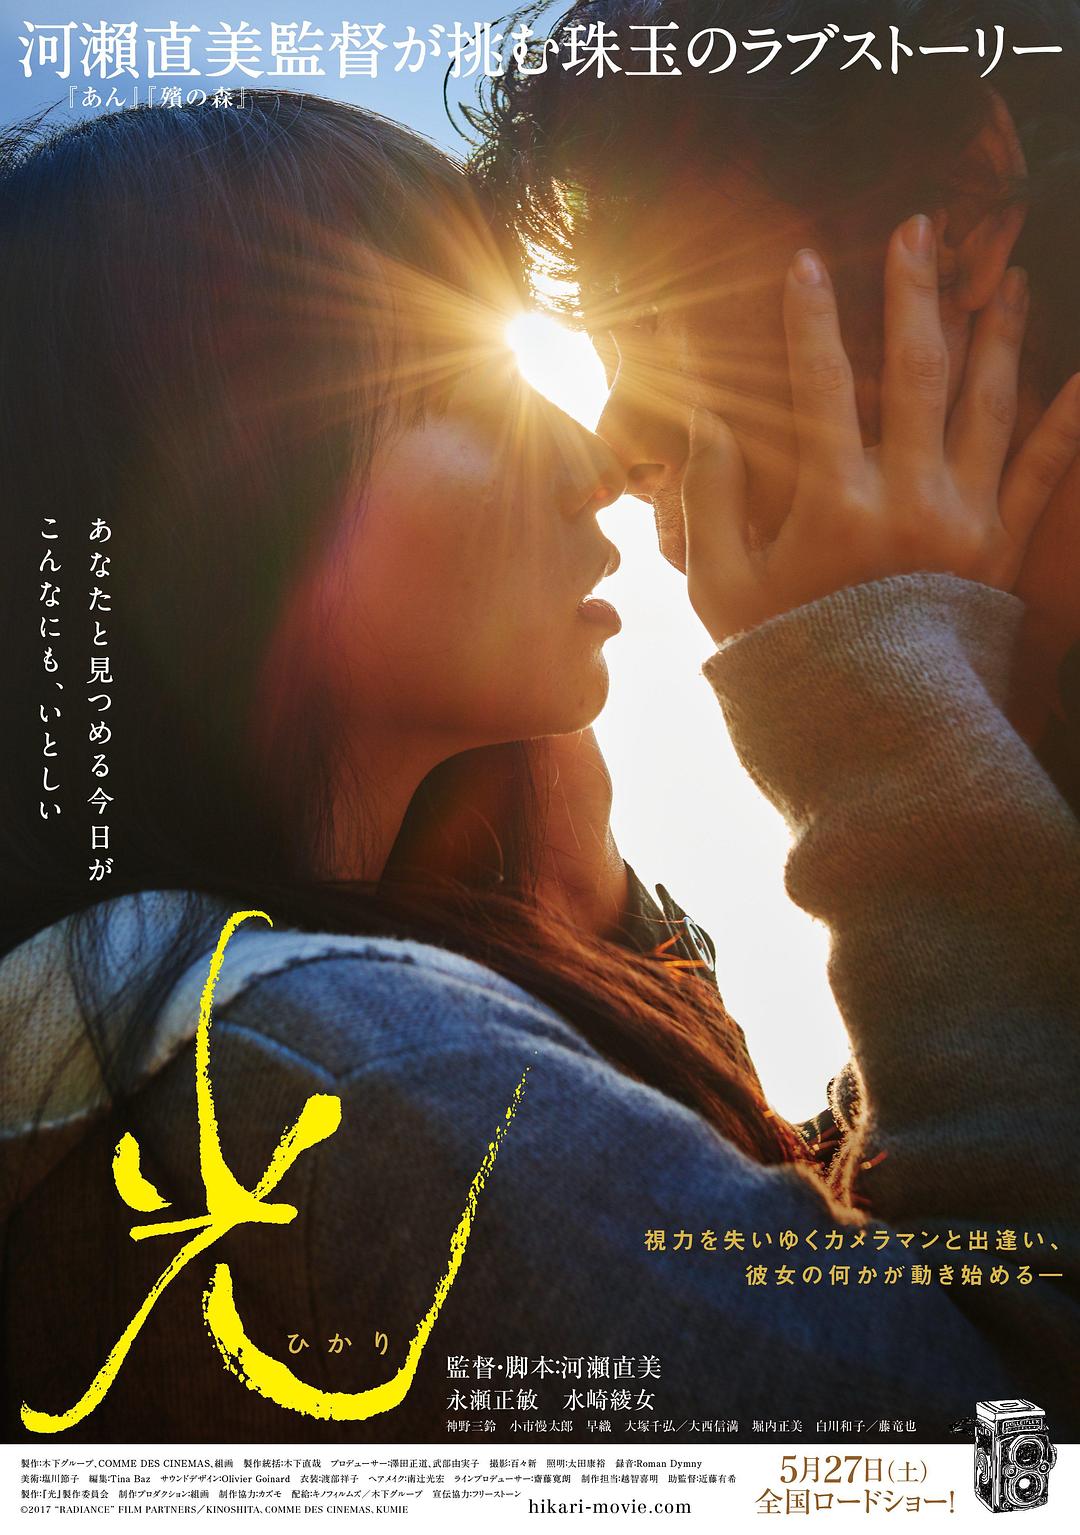  Radiance.2017.JAPANESE.1080p.BluRay.x264.DTS-FGT 9.22GB-1.png